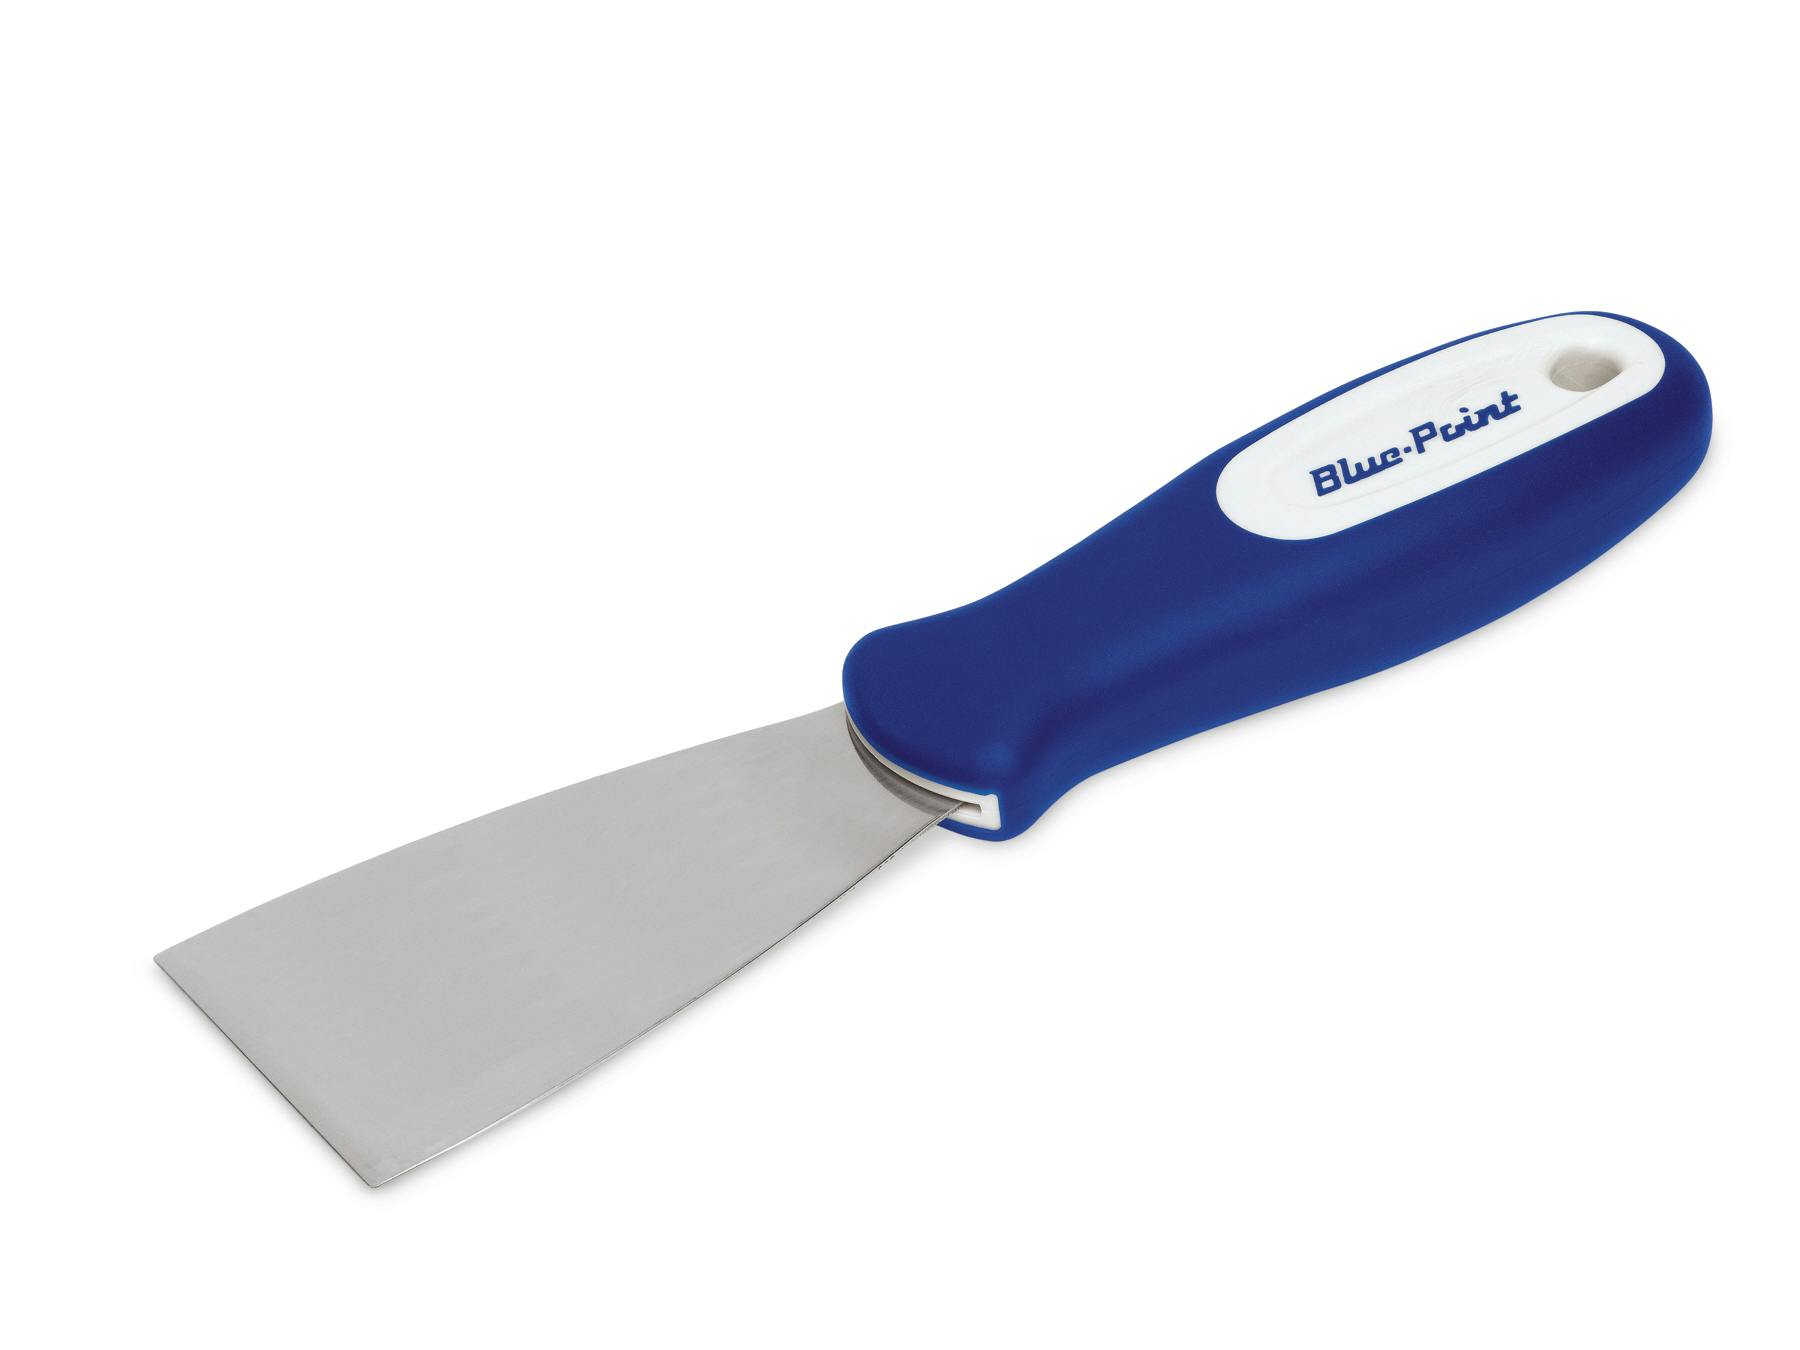 Single Bevel Maple Handle Putty Knife (Blue-Point®), PK23A